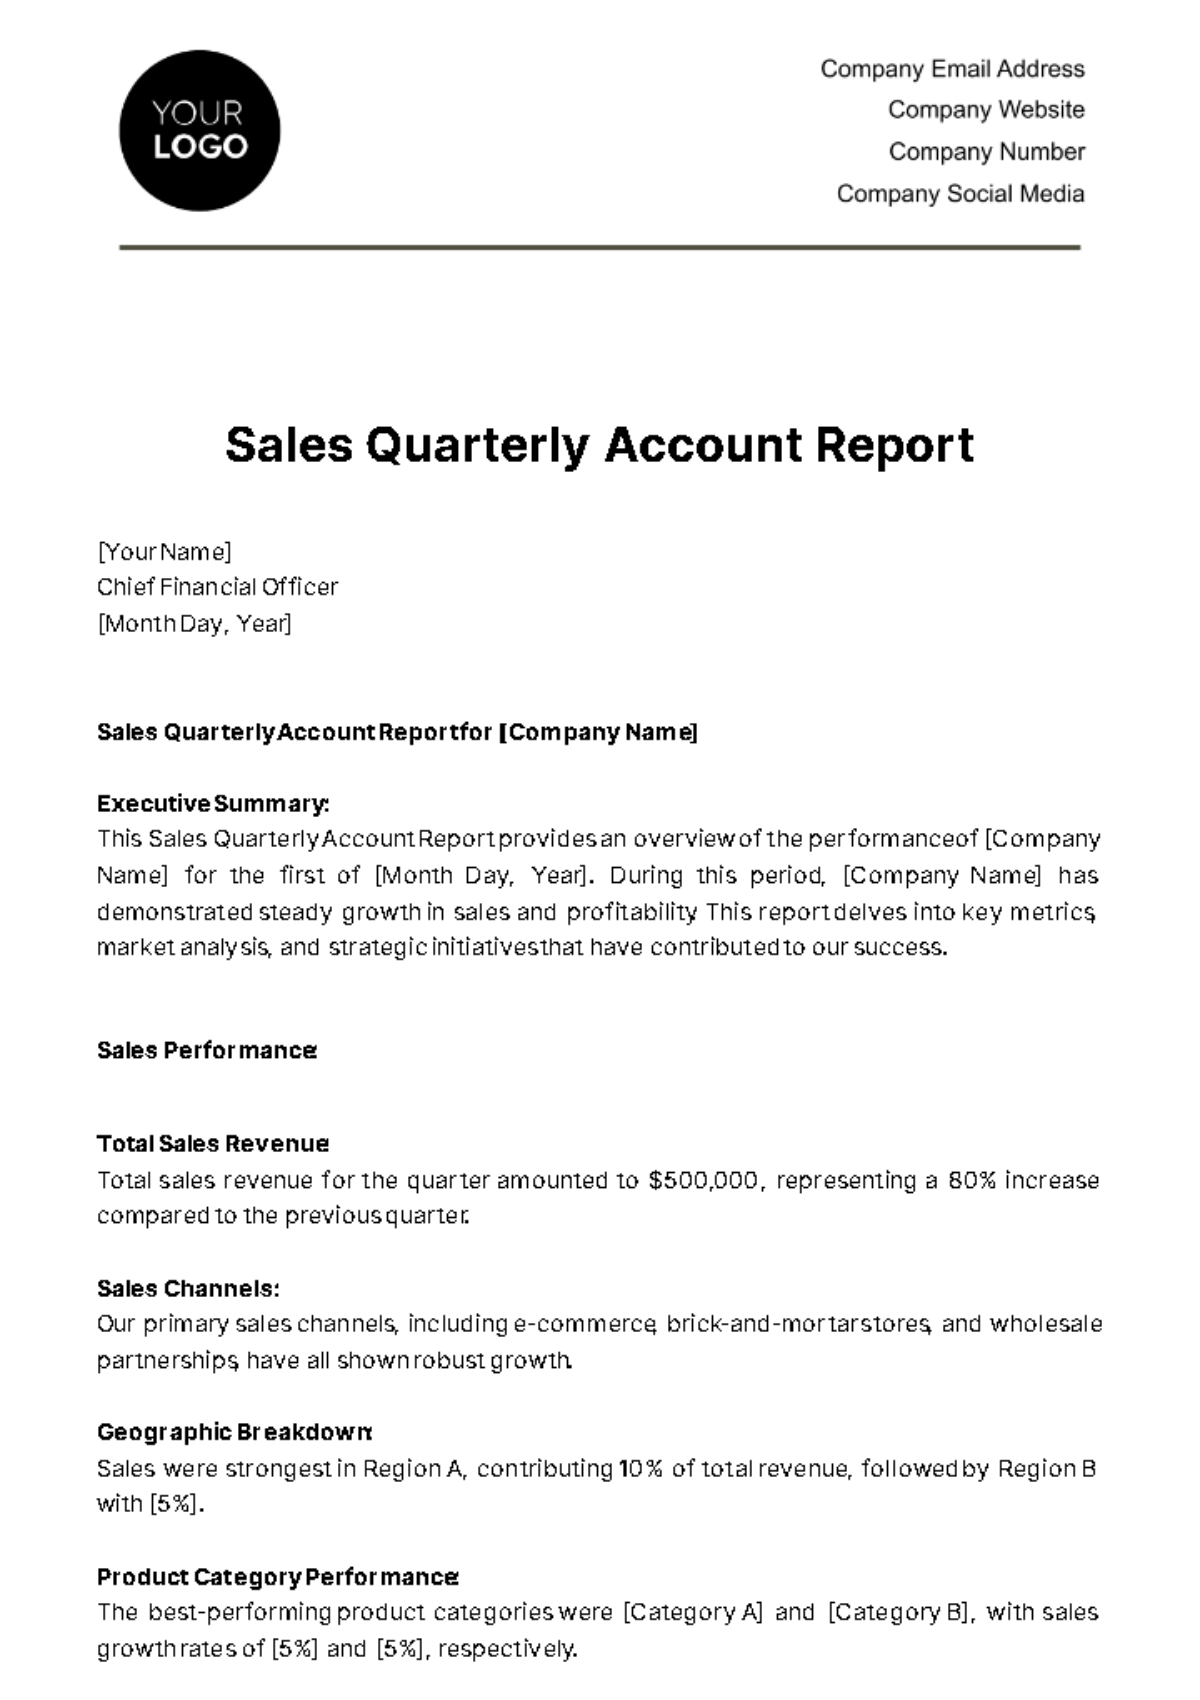 Free Sales Quarterly Account Report Template